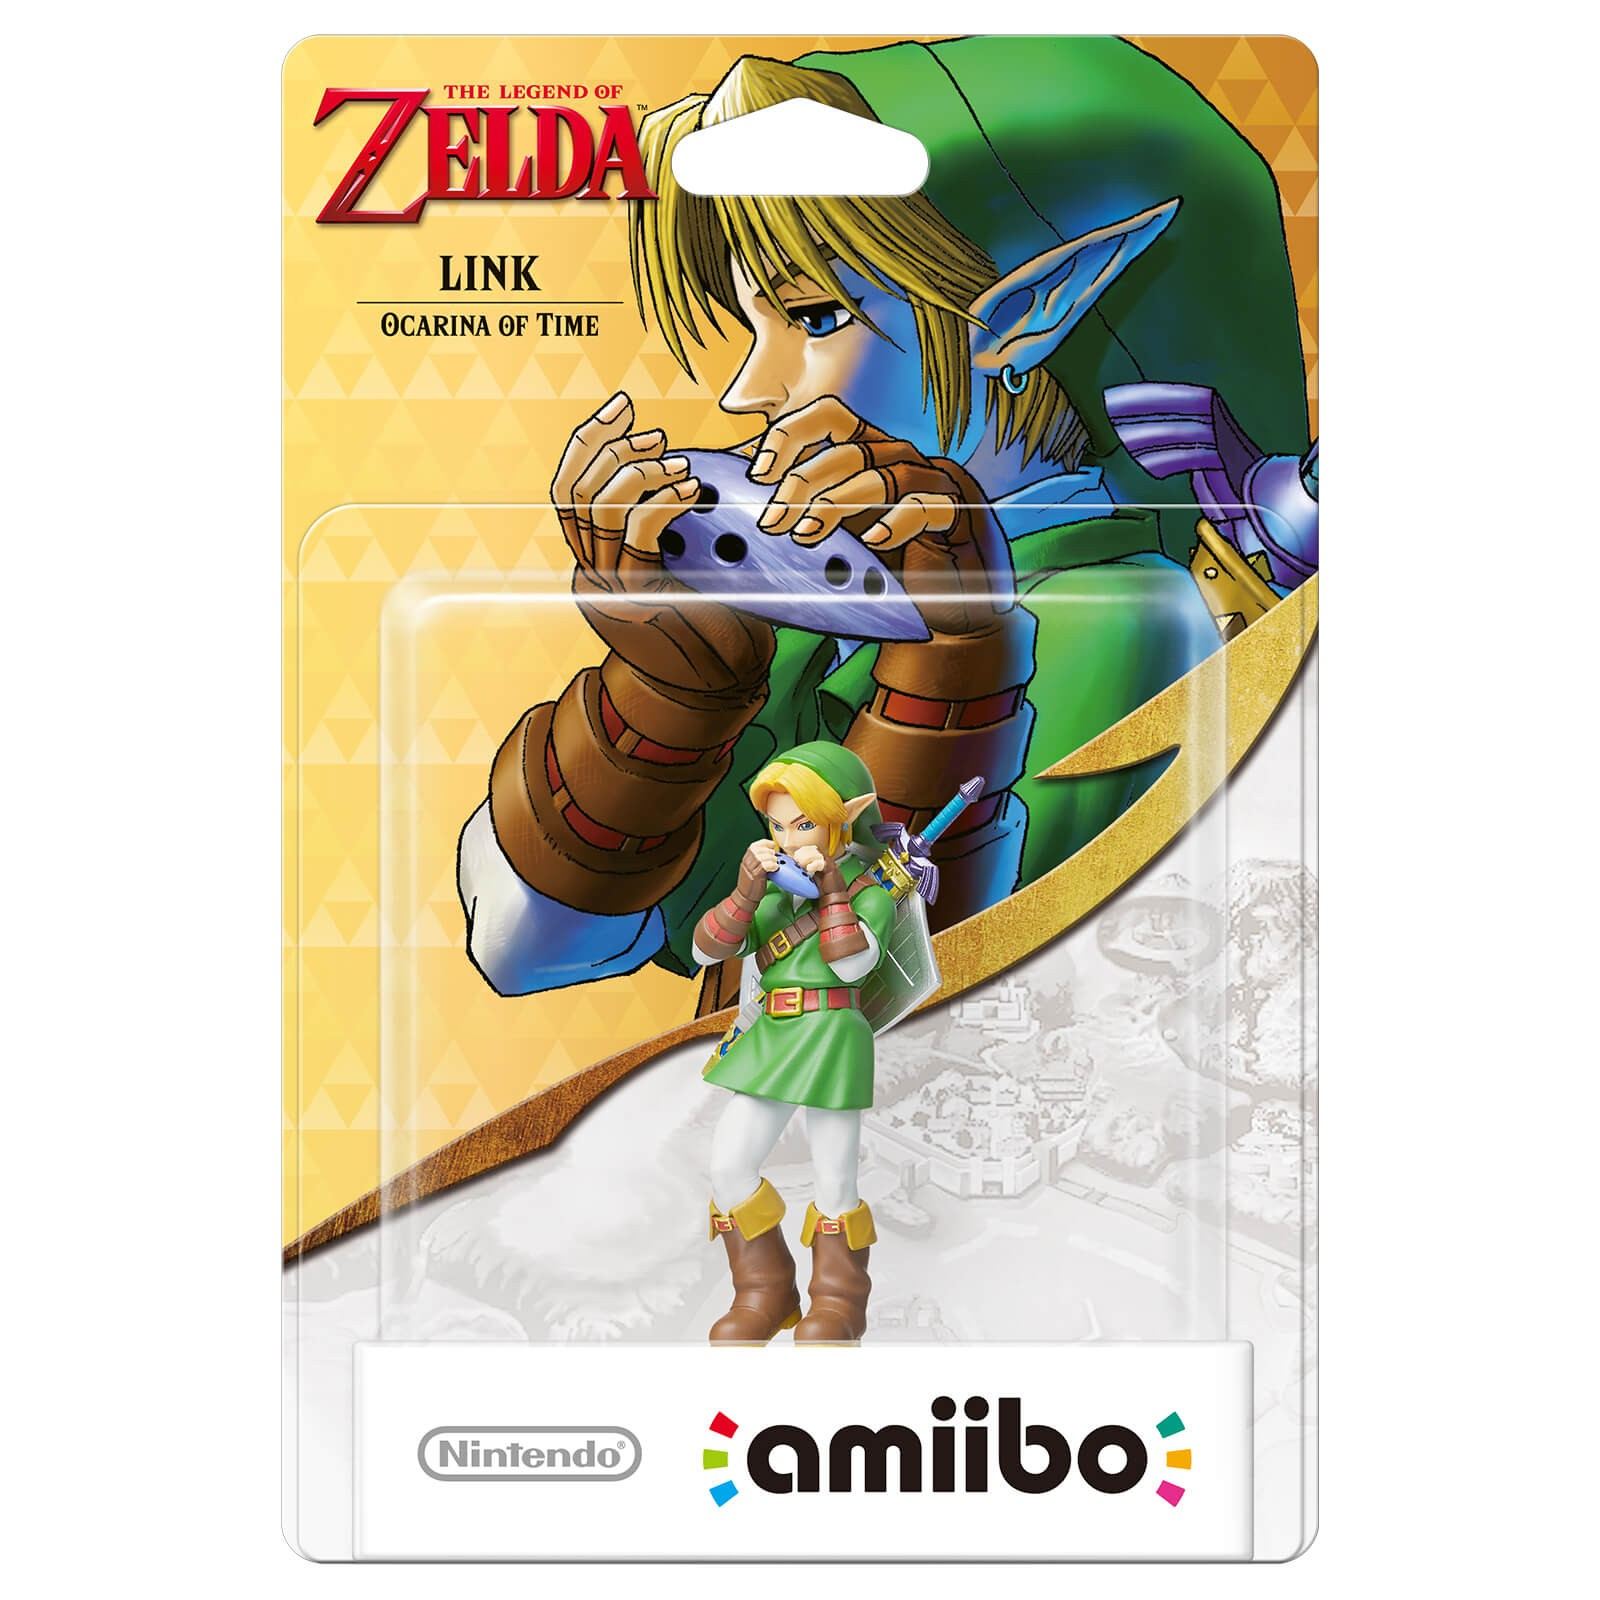 amiibo The Legend of Zelda Series Figure (Link Ocarina of Time) for Wii U,  New 3DS, New 3DS LL / XL, SW